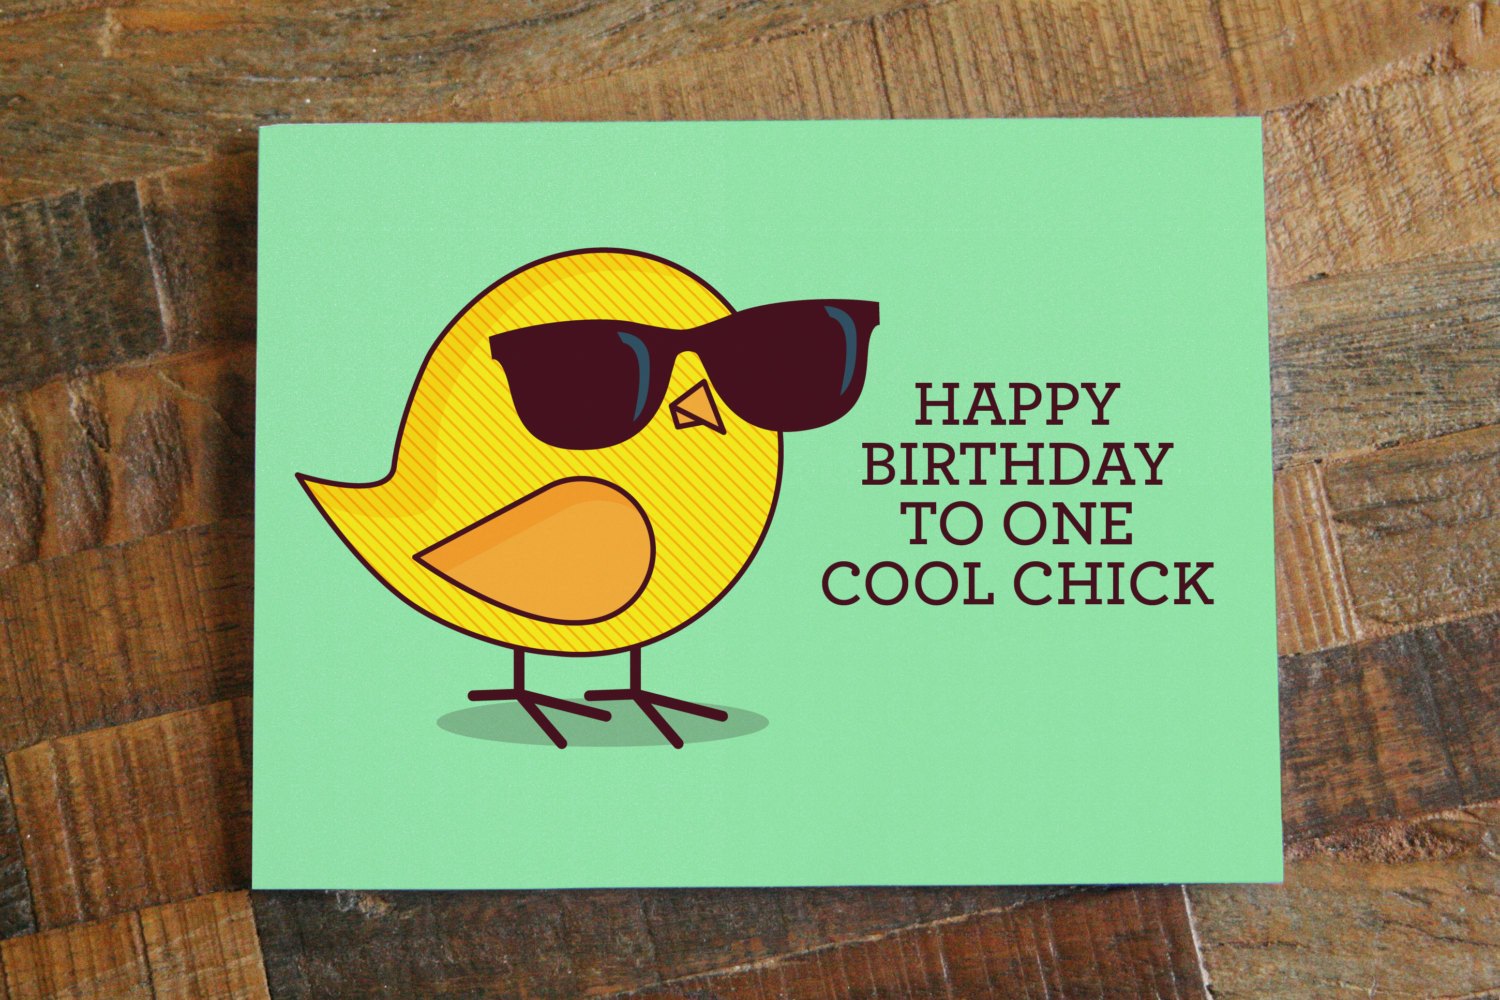 Free Funny Happy Birthday Cards
 Funny Birthday Card For Her "Happy Birthday to e Cool